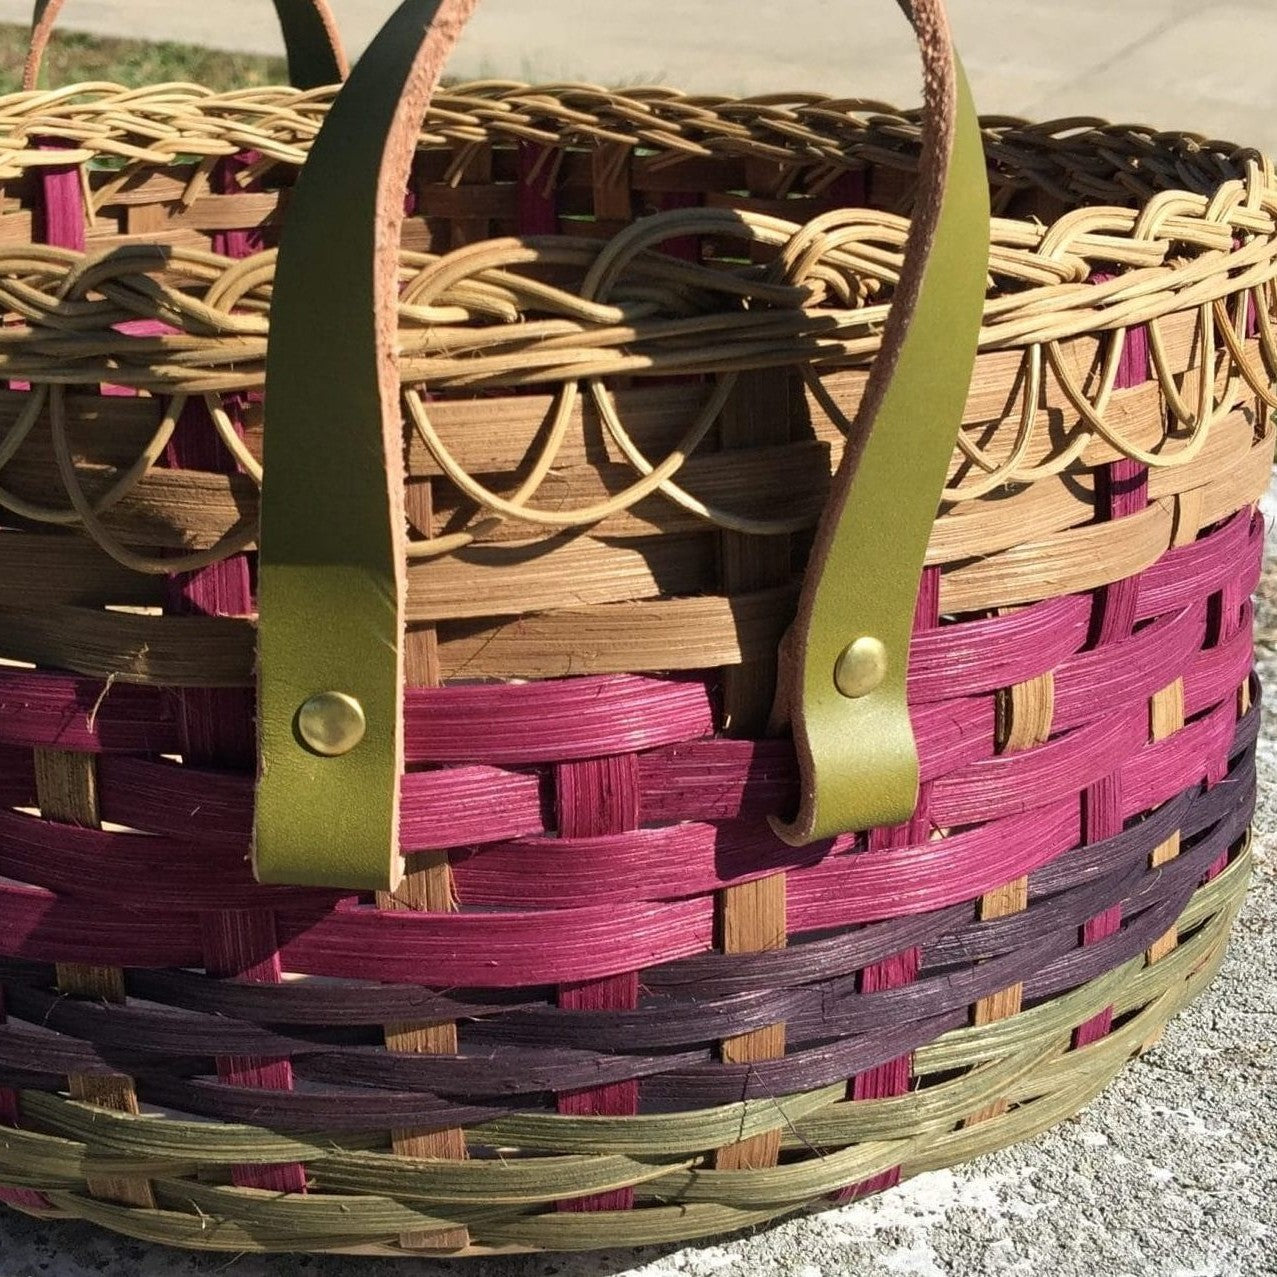 Leather-n-Lace Basket